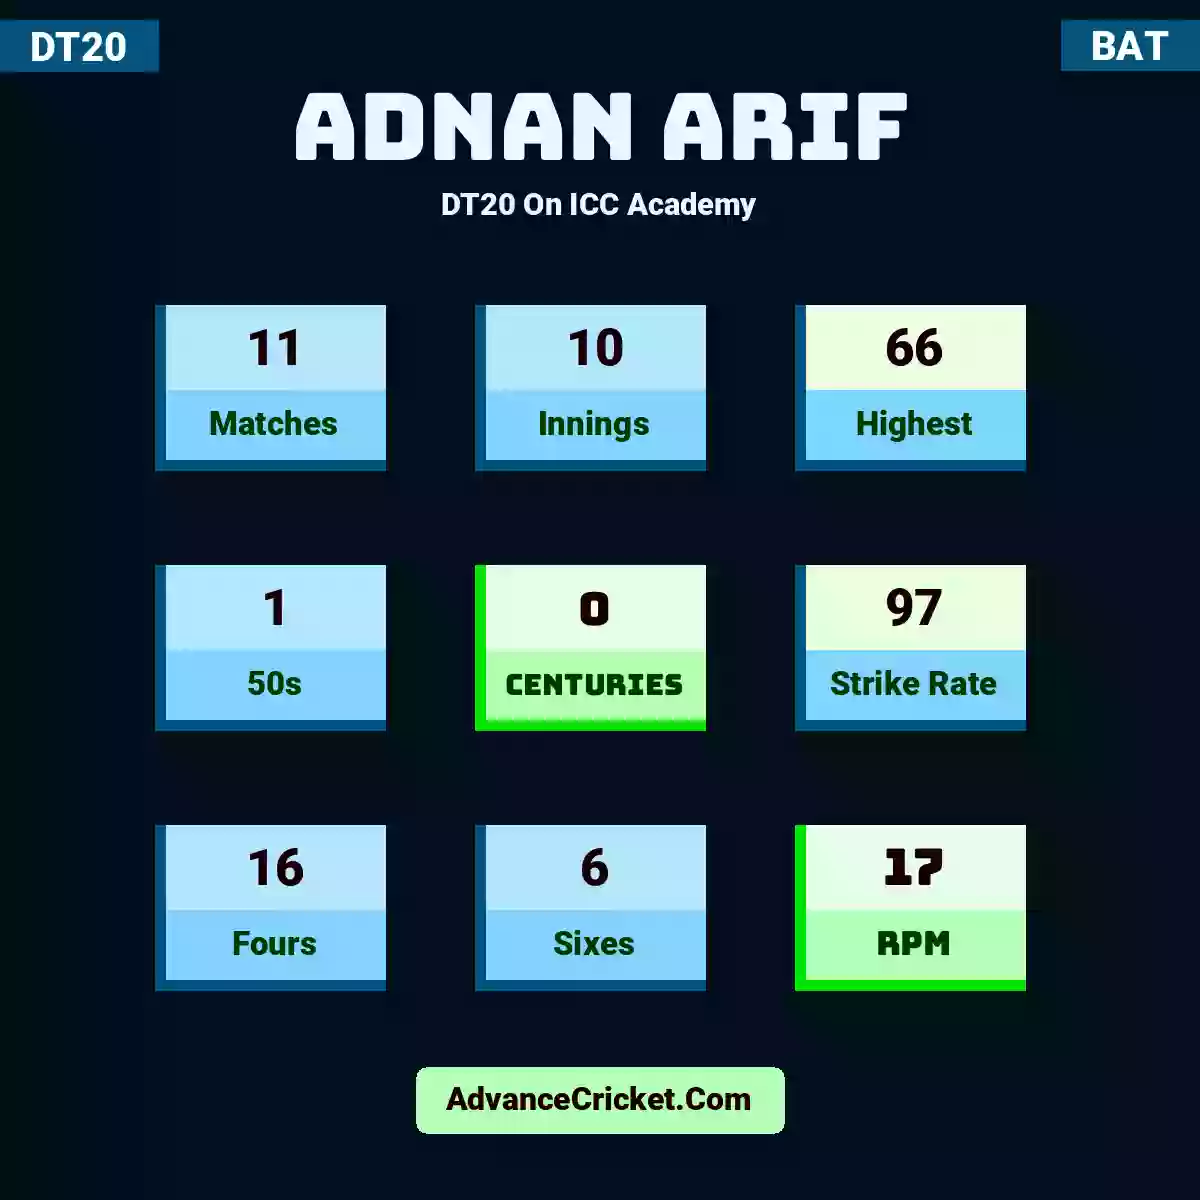 Adnan Arif DT20  On ICC Academy, Adnan Arif played 11 matches, scored 66 runs as highest, 1 half-centuries, and 0 centuries, with a strike rate of 97. A.Arif hit 16 fours and 6 sixes, with an RPM of 17.